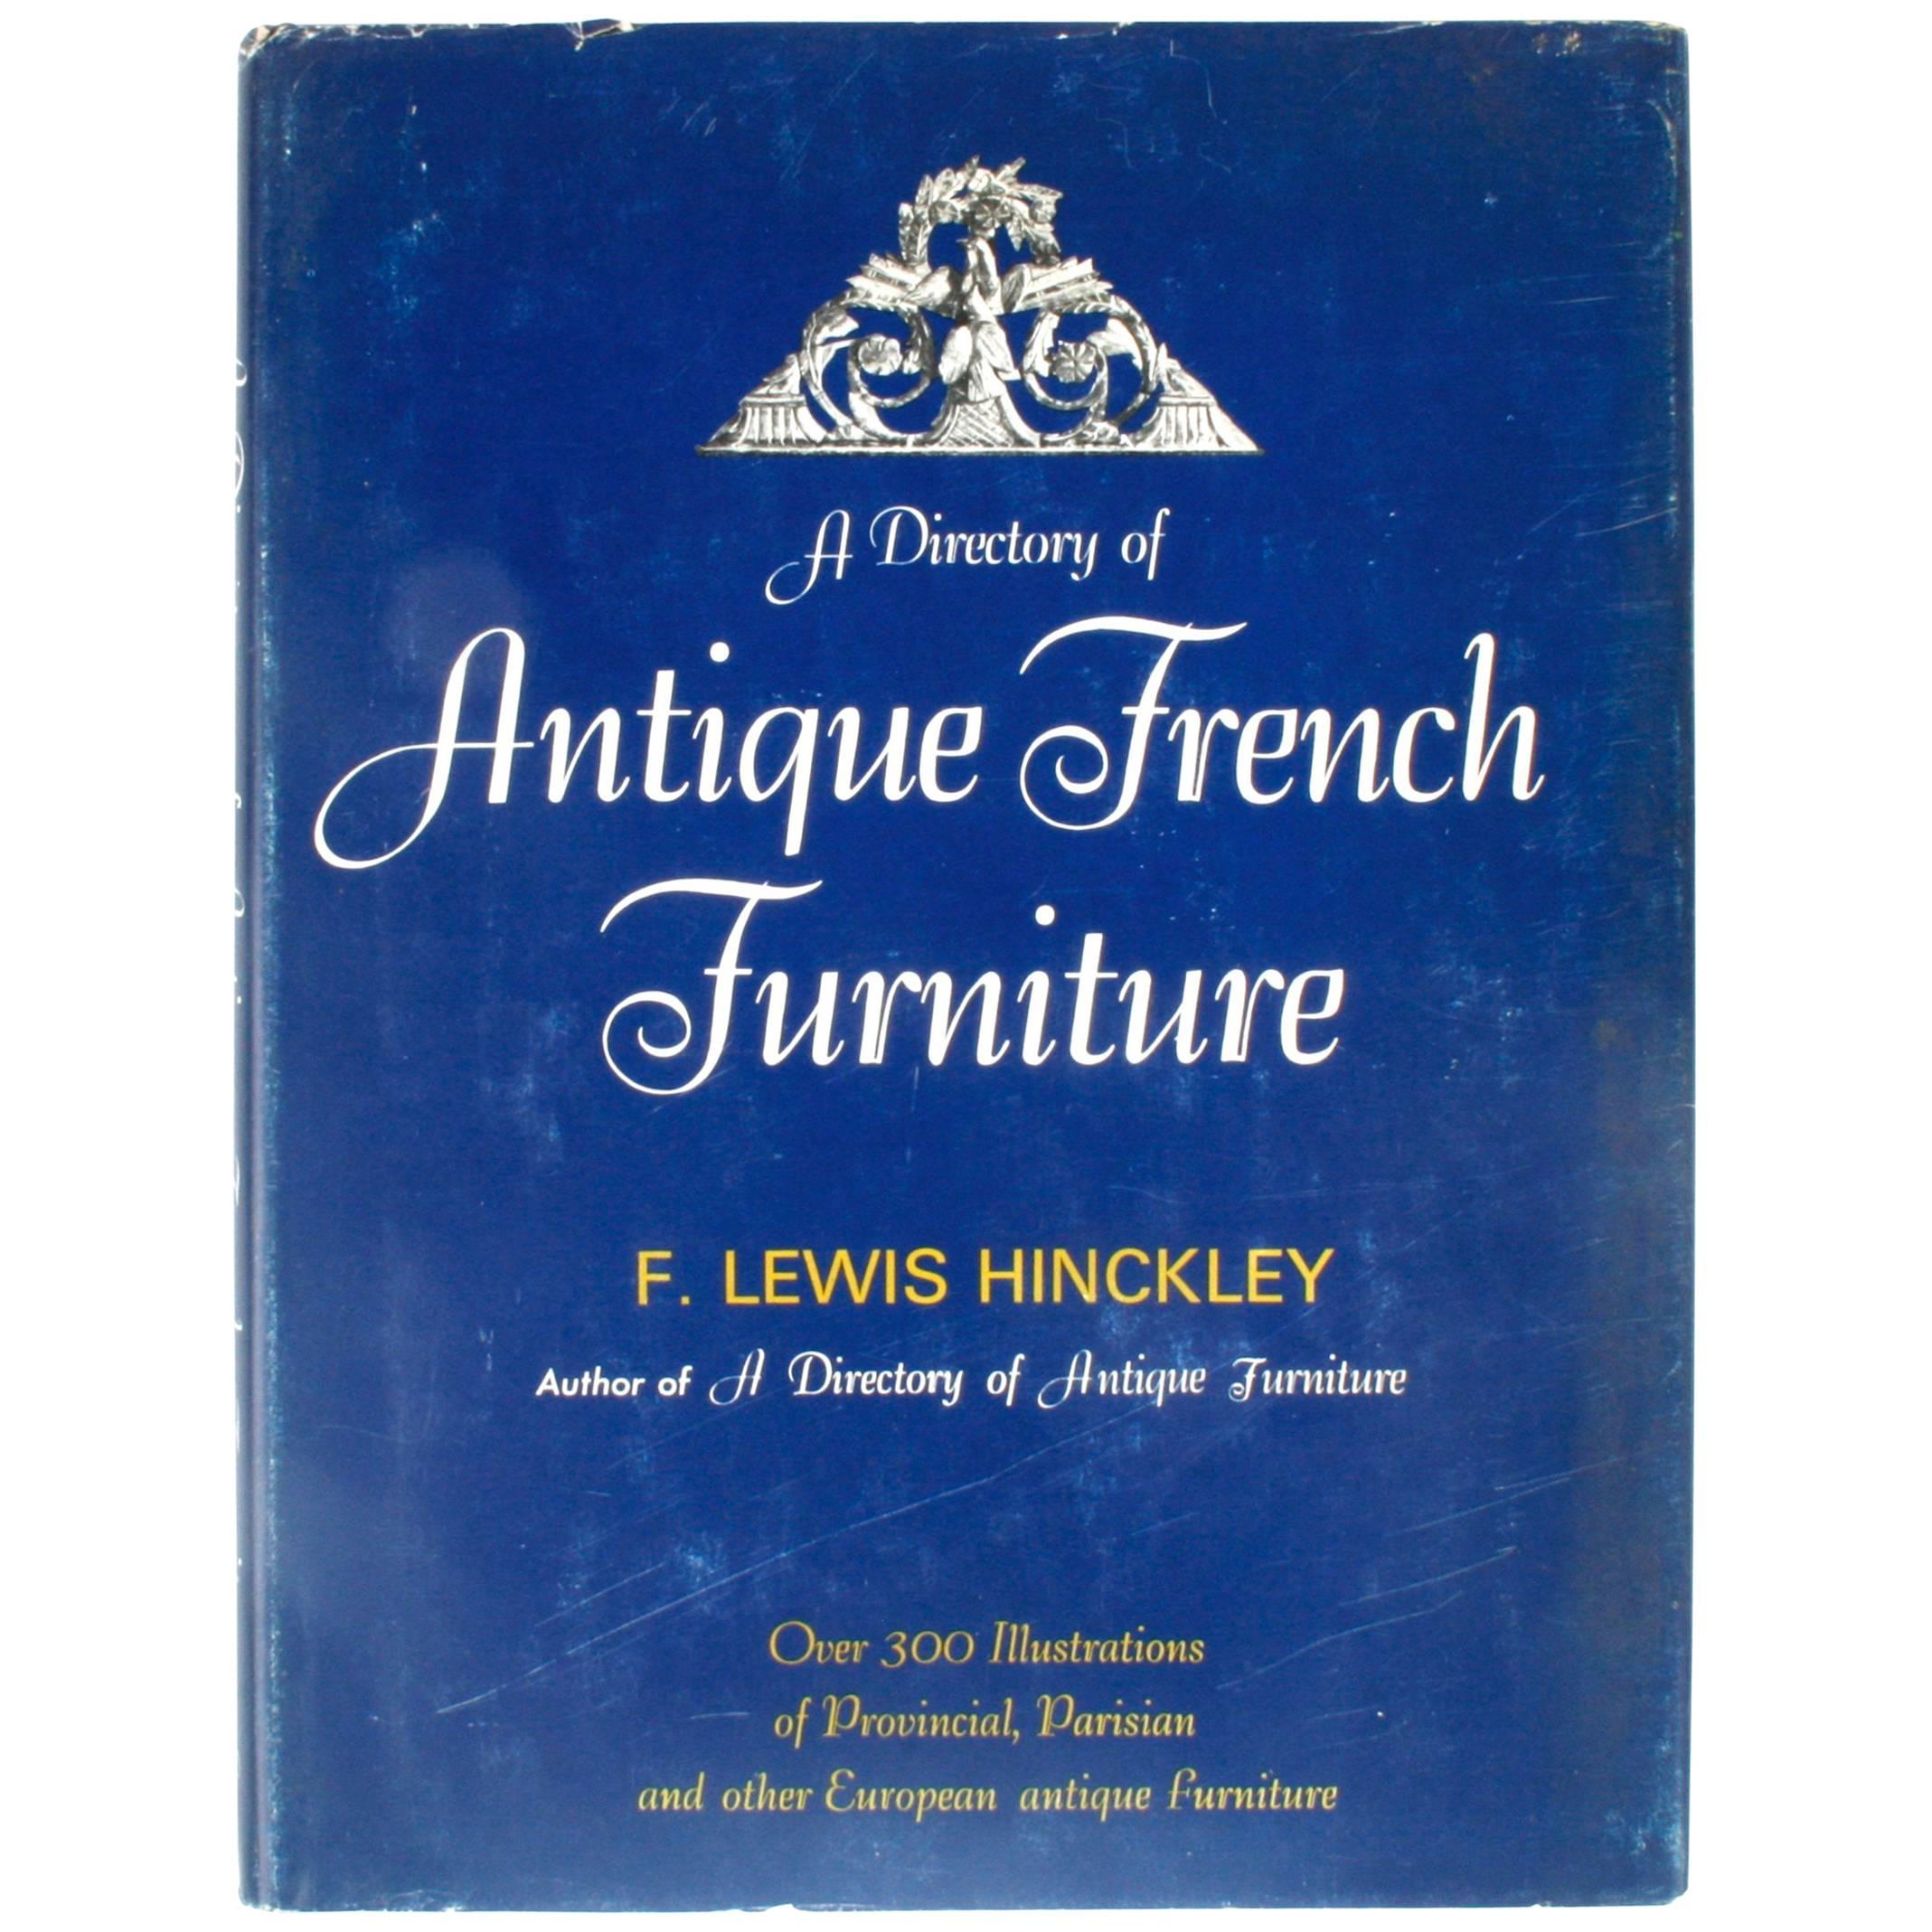 Antique French Furniture by F. Lewis Hinckley, First Edition